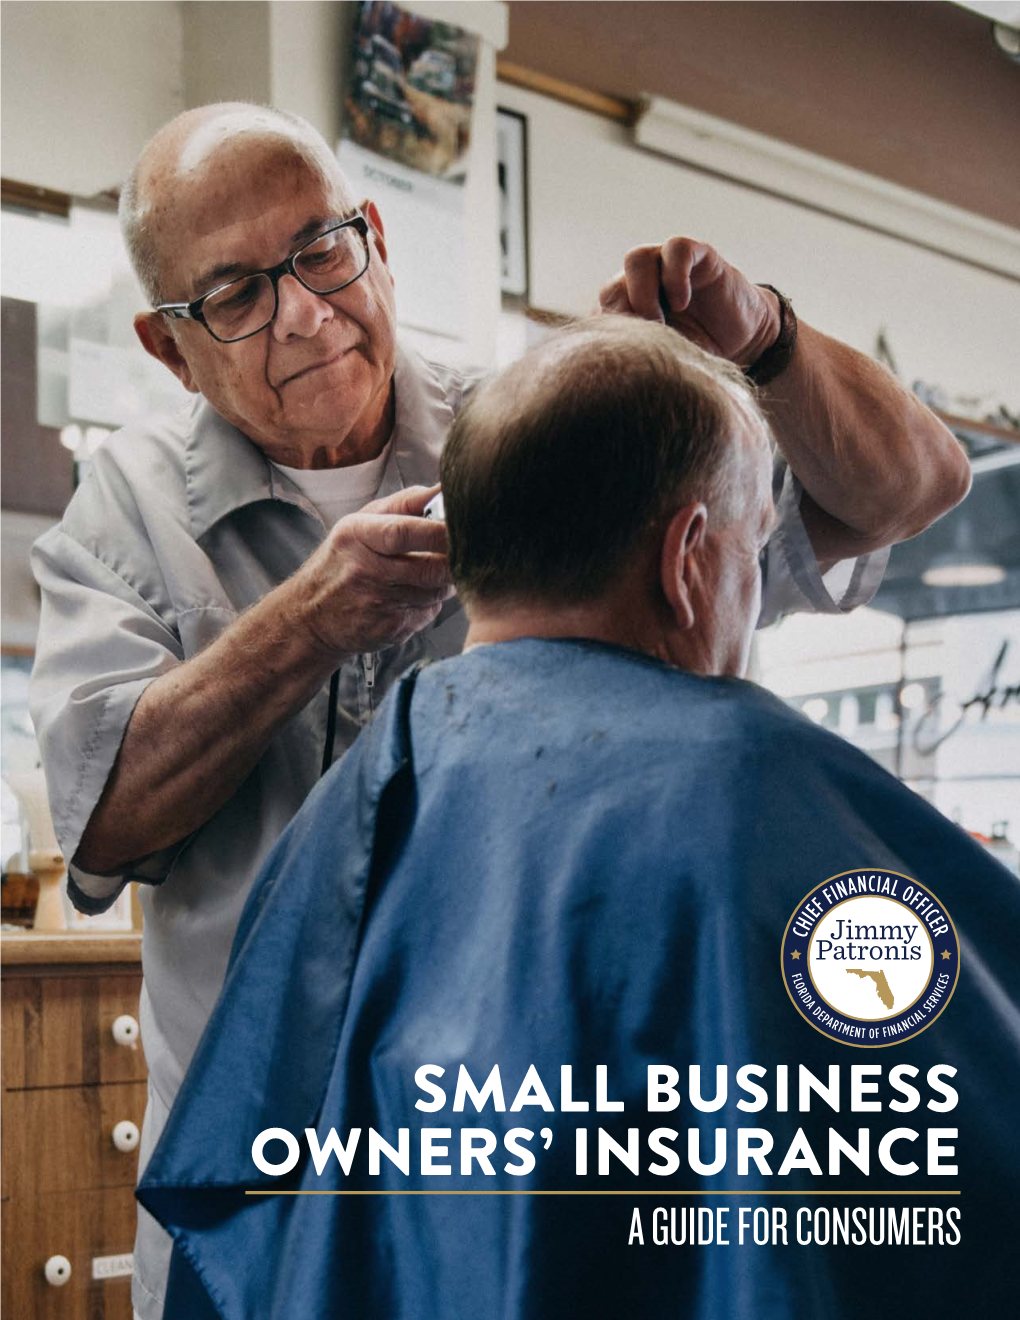 Florida Small Business Owners' Insurance Guide